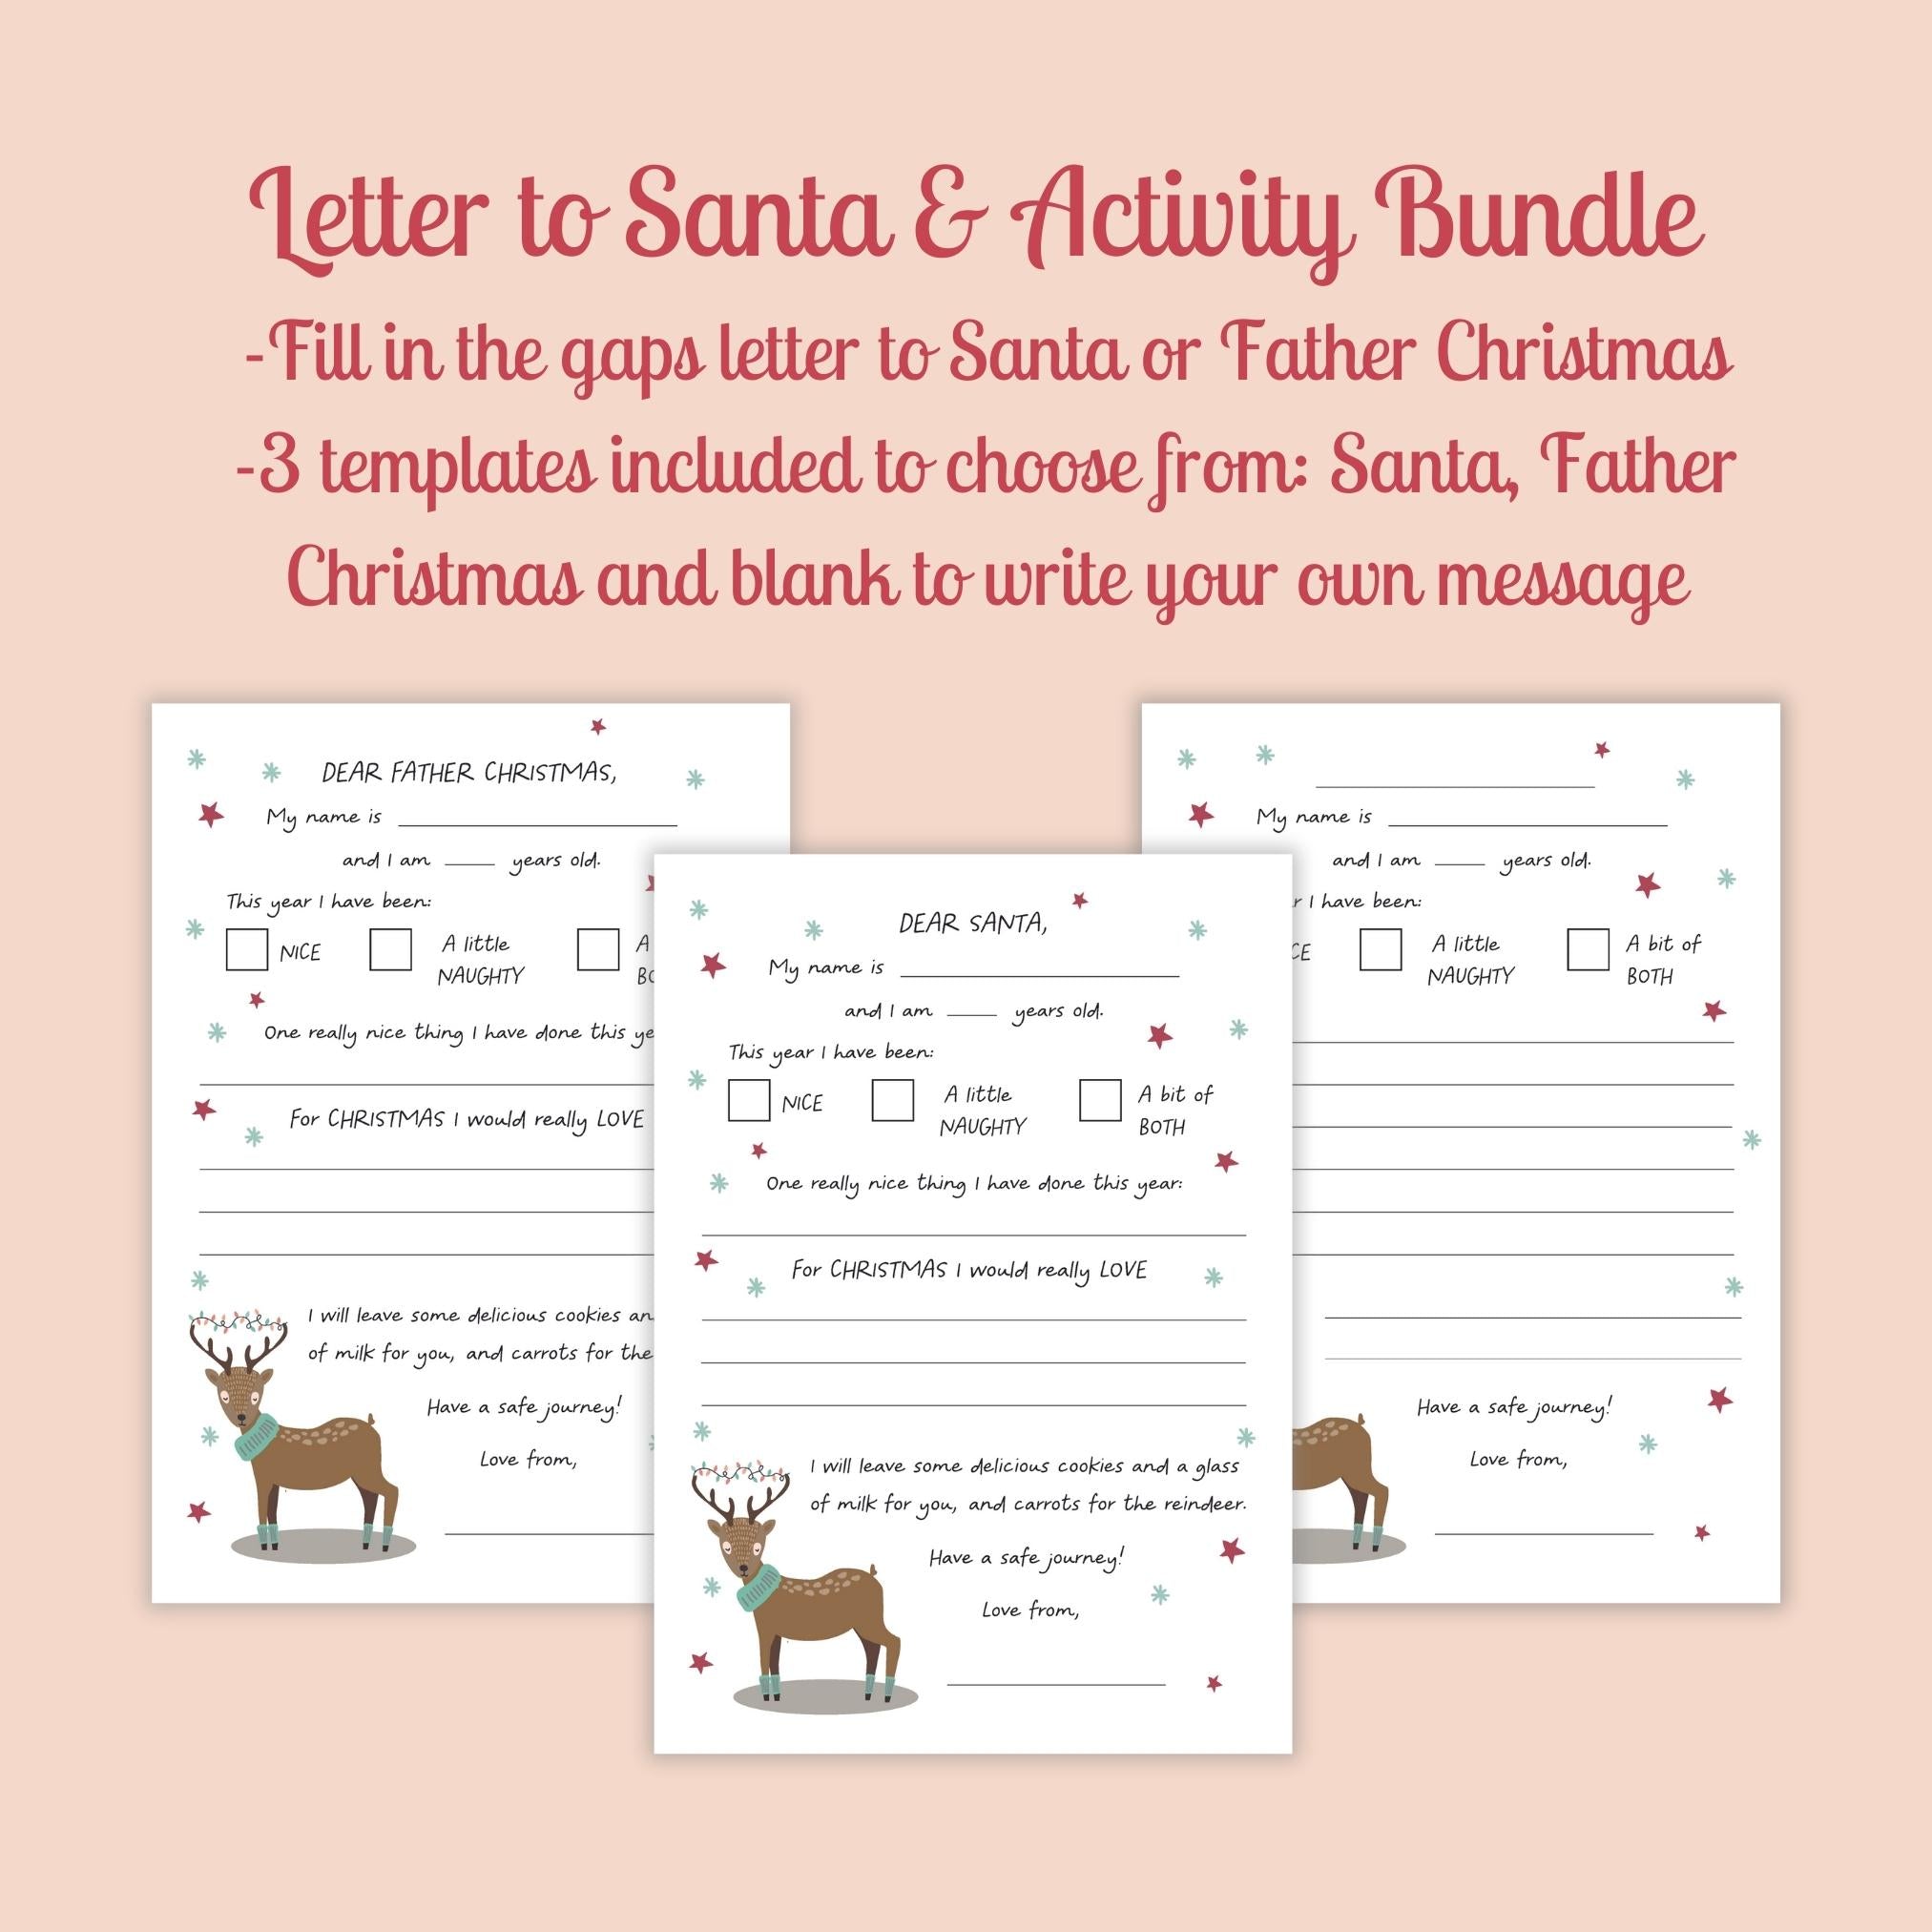 Printable Letter to Santa & 18 Festive Activities